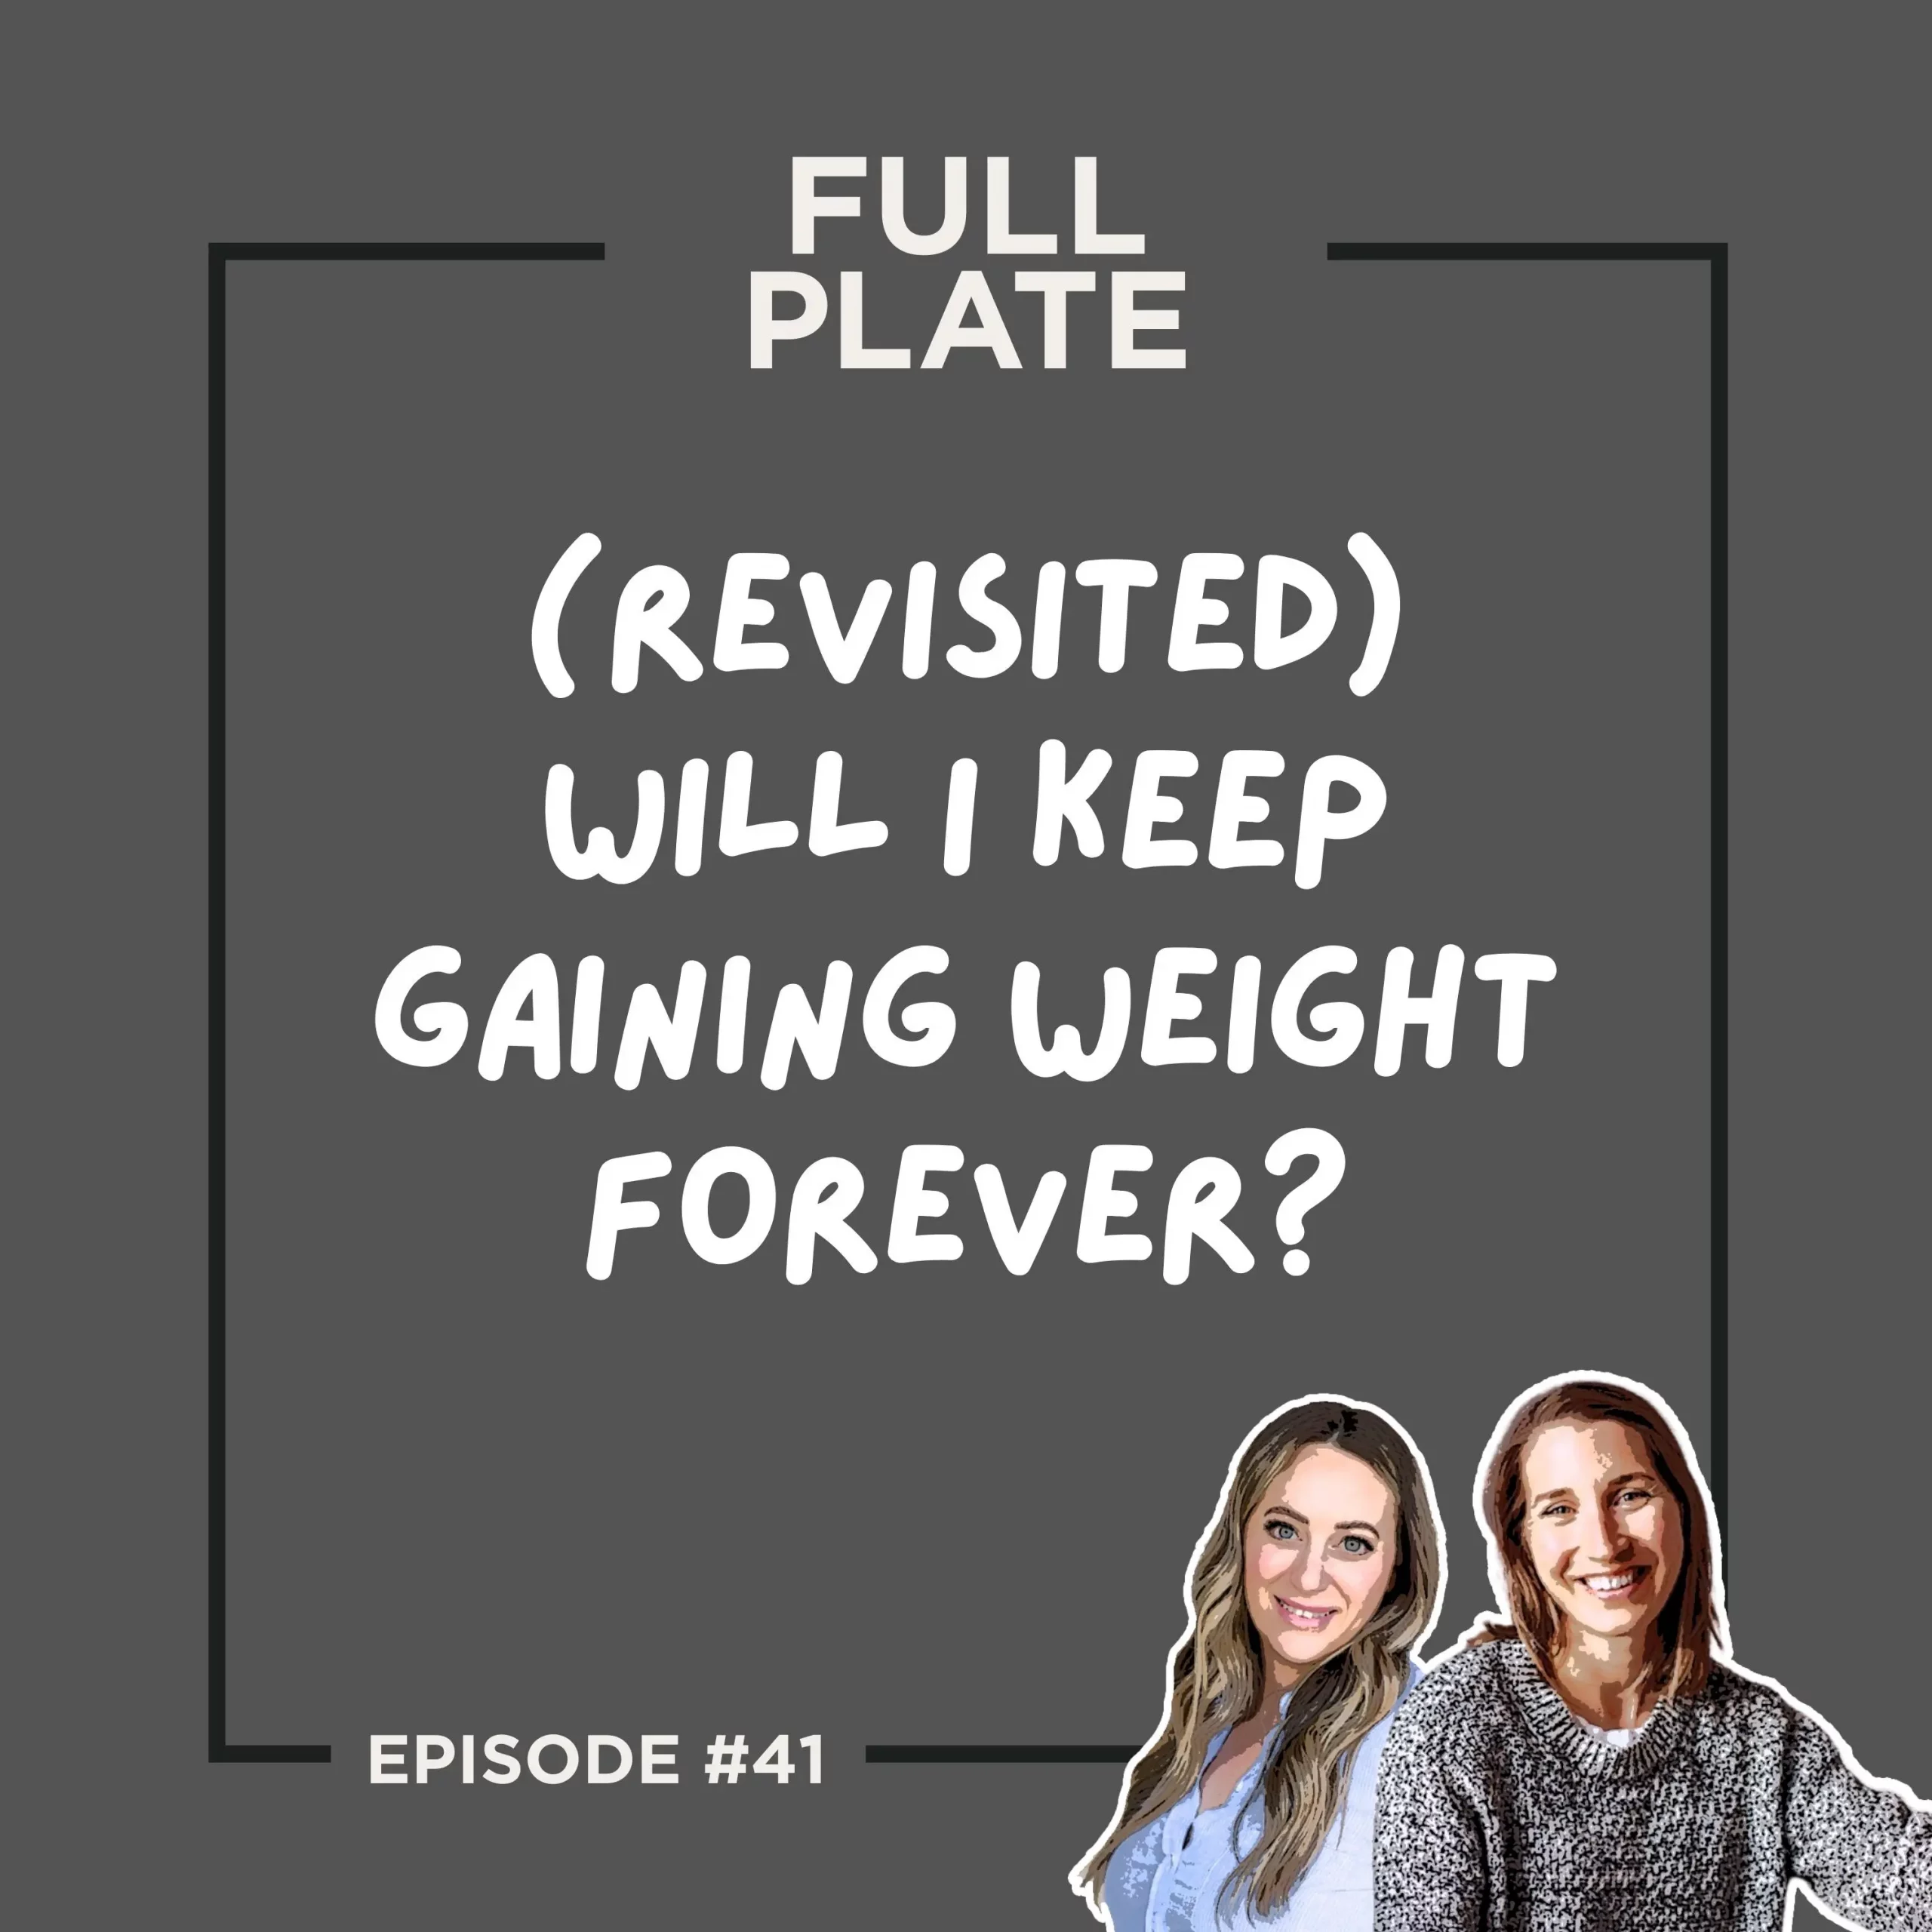 Full Plate Podcast | Ditch diet culture, respect your body, and set boundaries | Episode 41: (Revisited) Will I Keep Gaining Weight Forever?